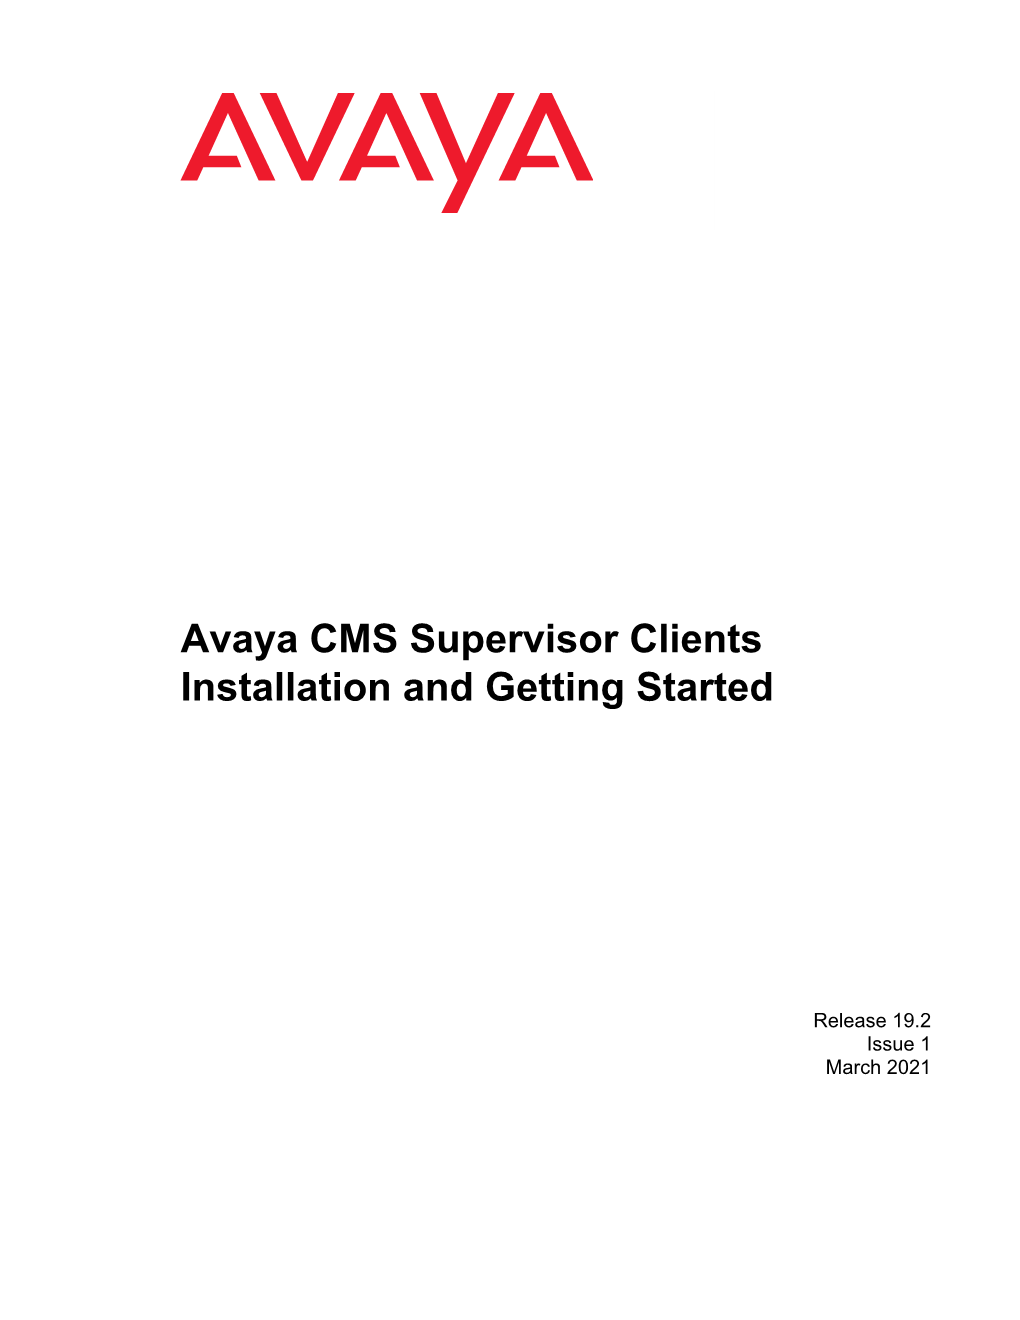 Avaya CMS Supervisor Clients Installation and Getting Started